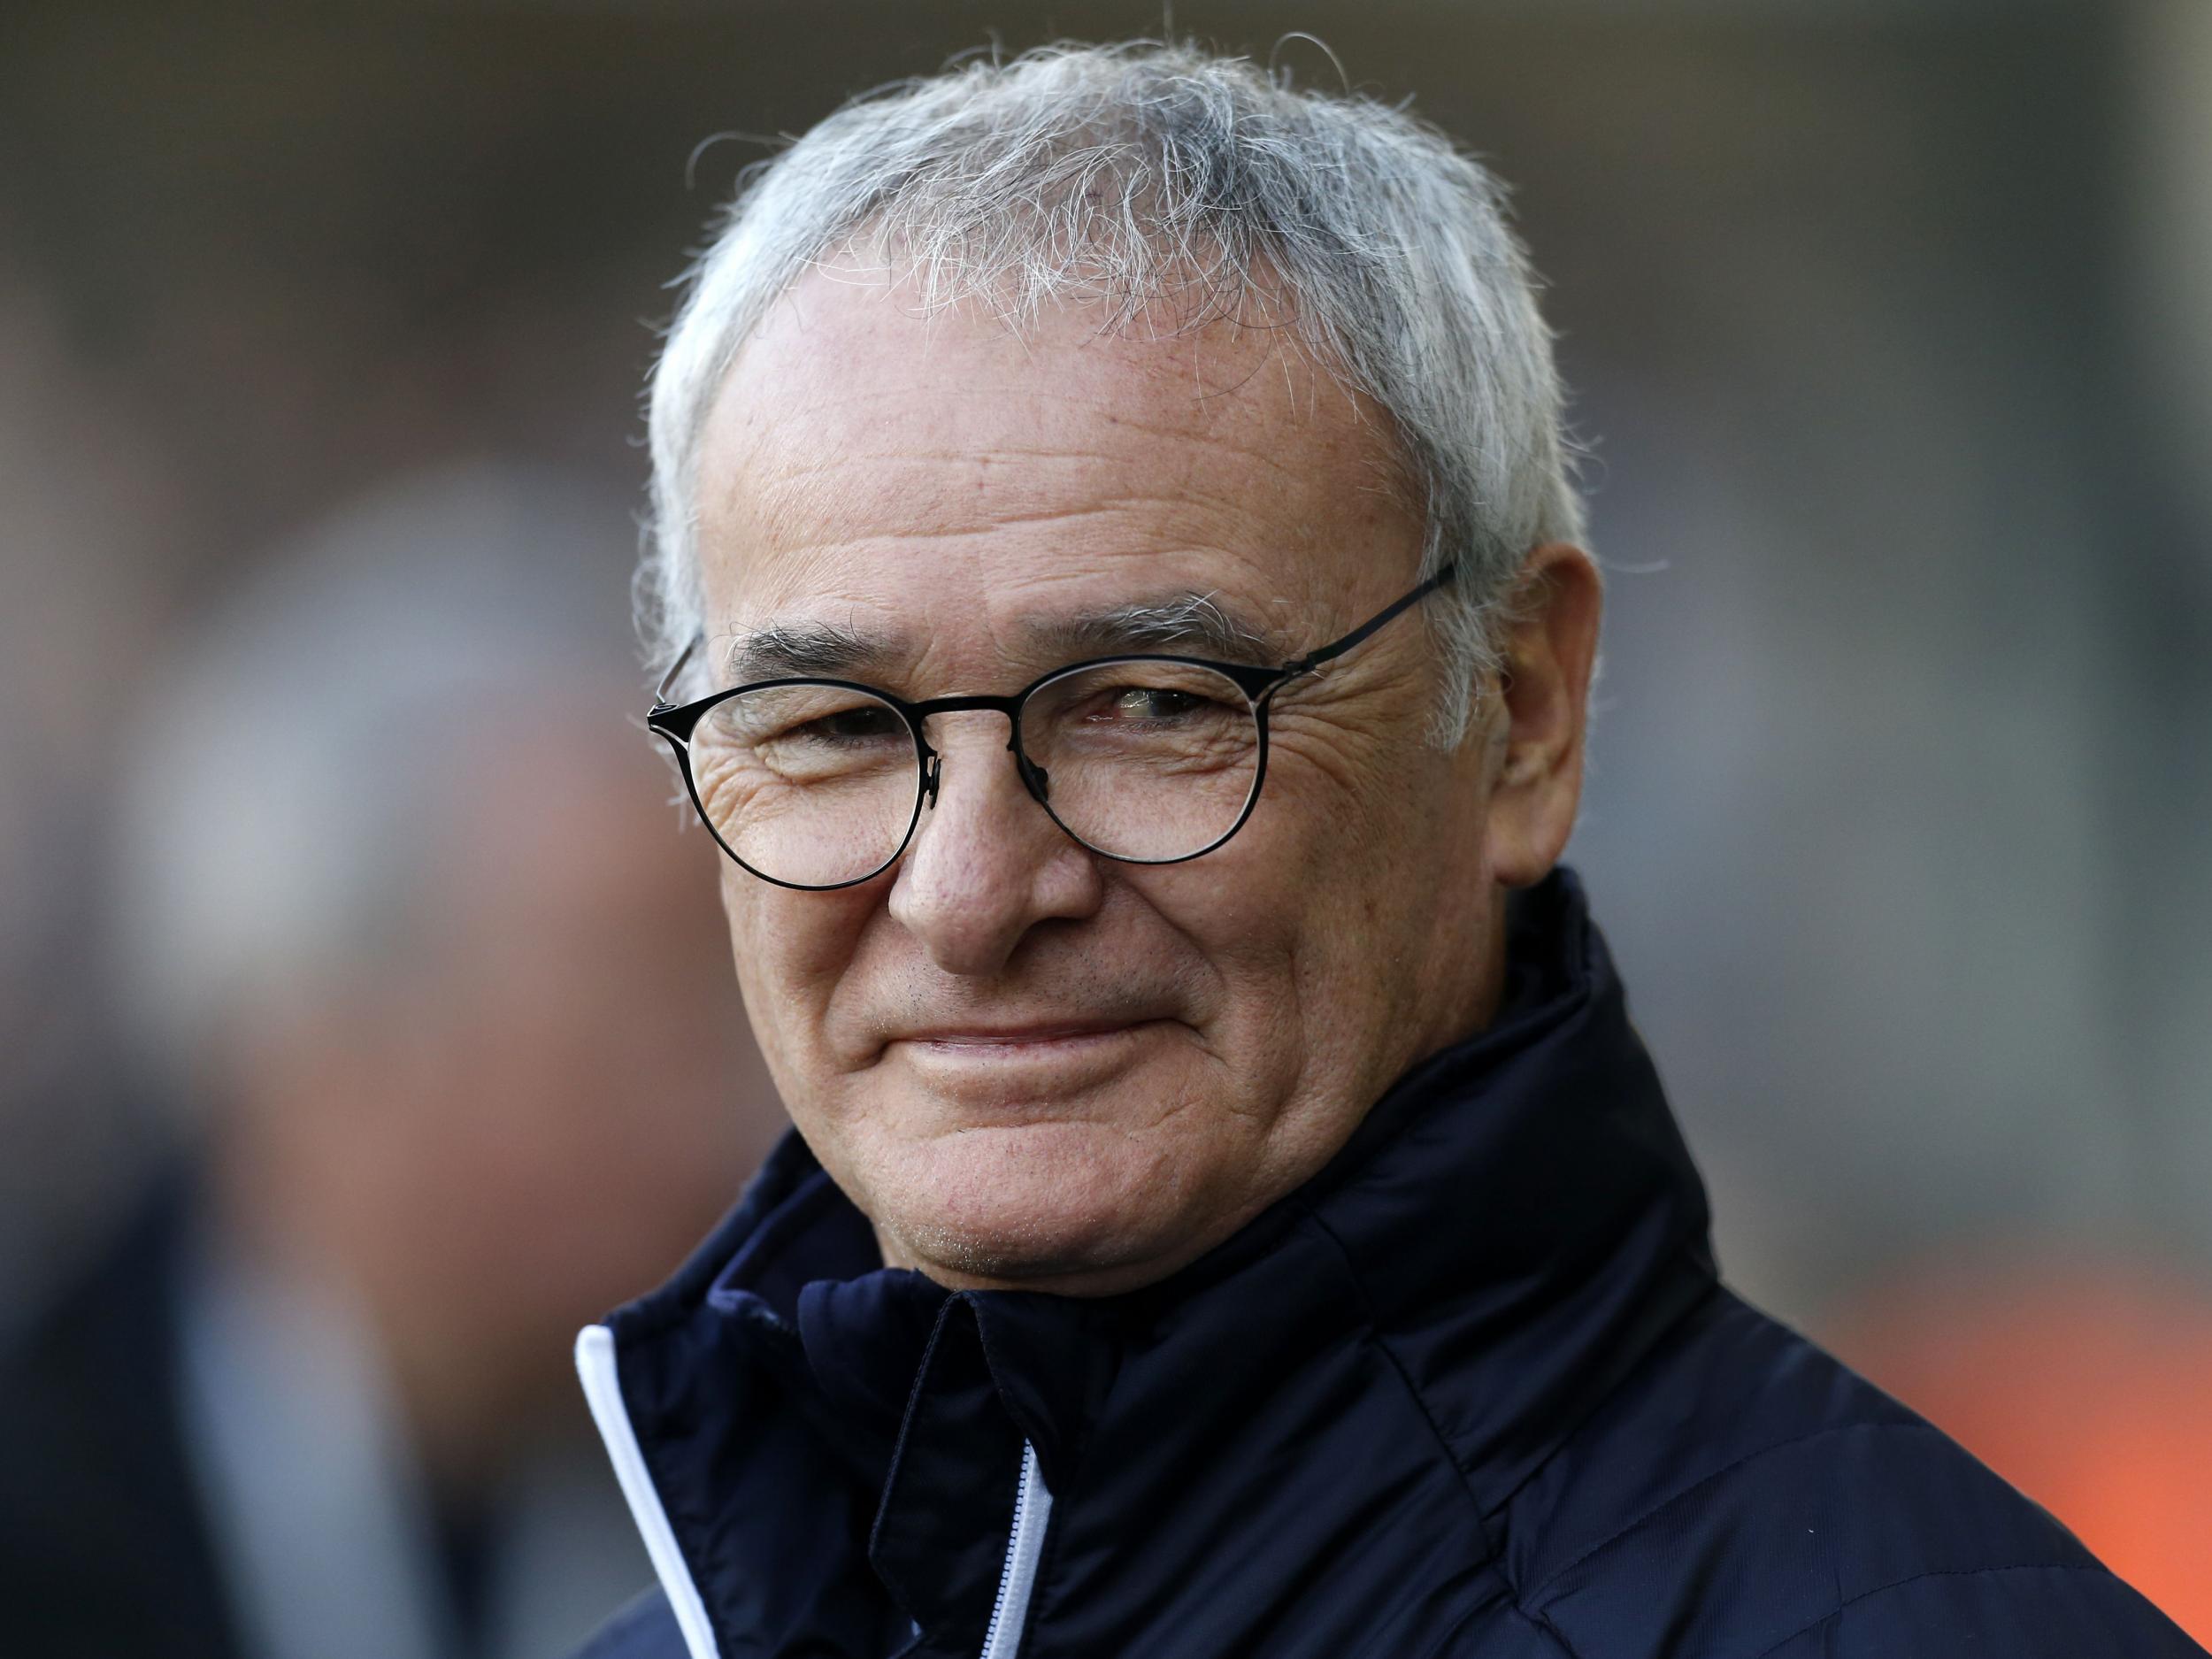 Ranieri has not yet been contacted by Watford